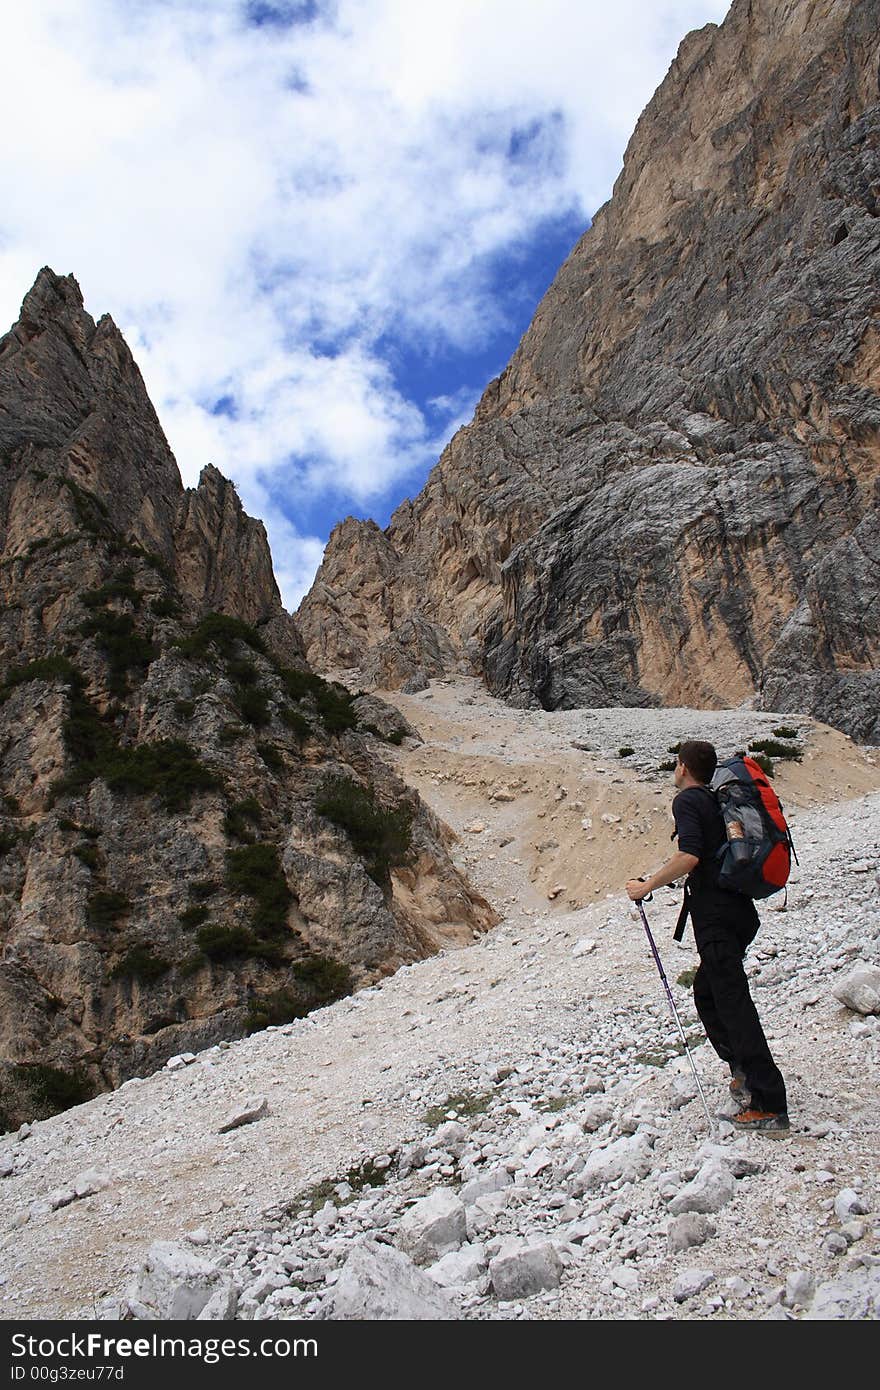 Mountaineering in the Dolomites,Italy